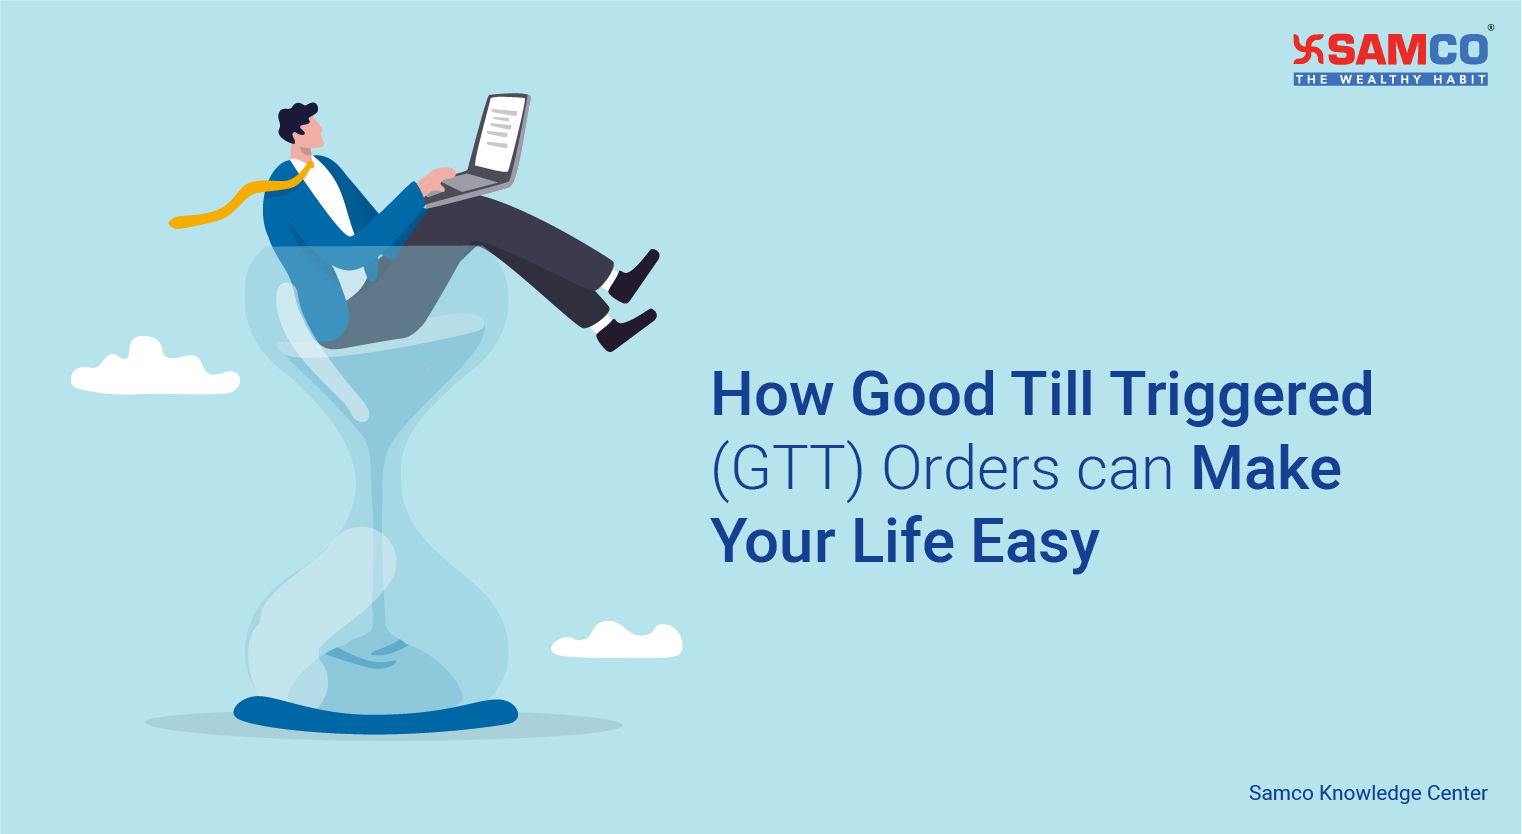 How Good Till Triggered (GTT) Orders can Make Your Life Easy